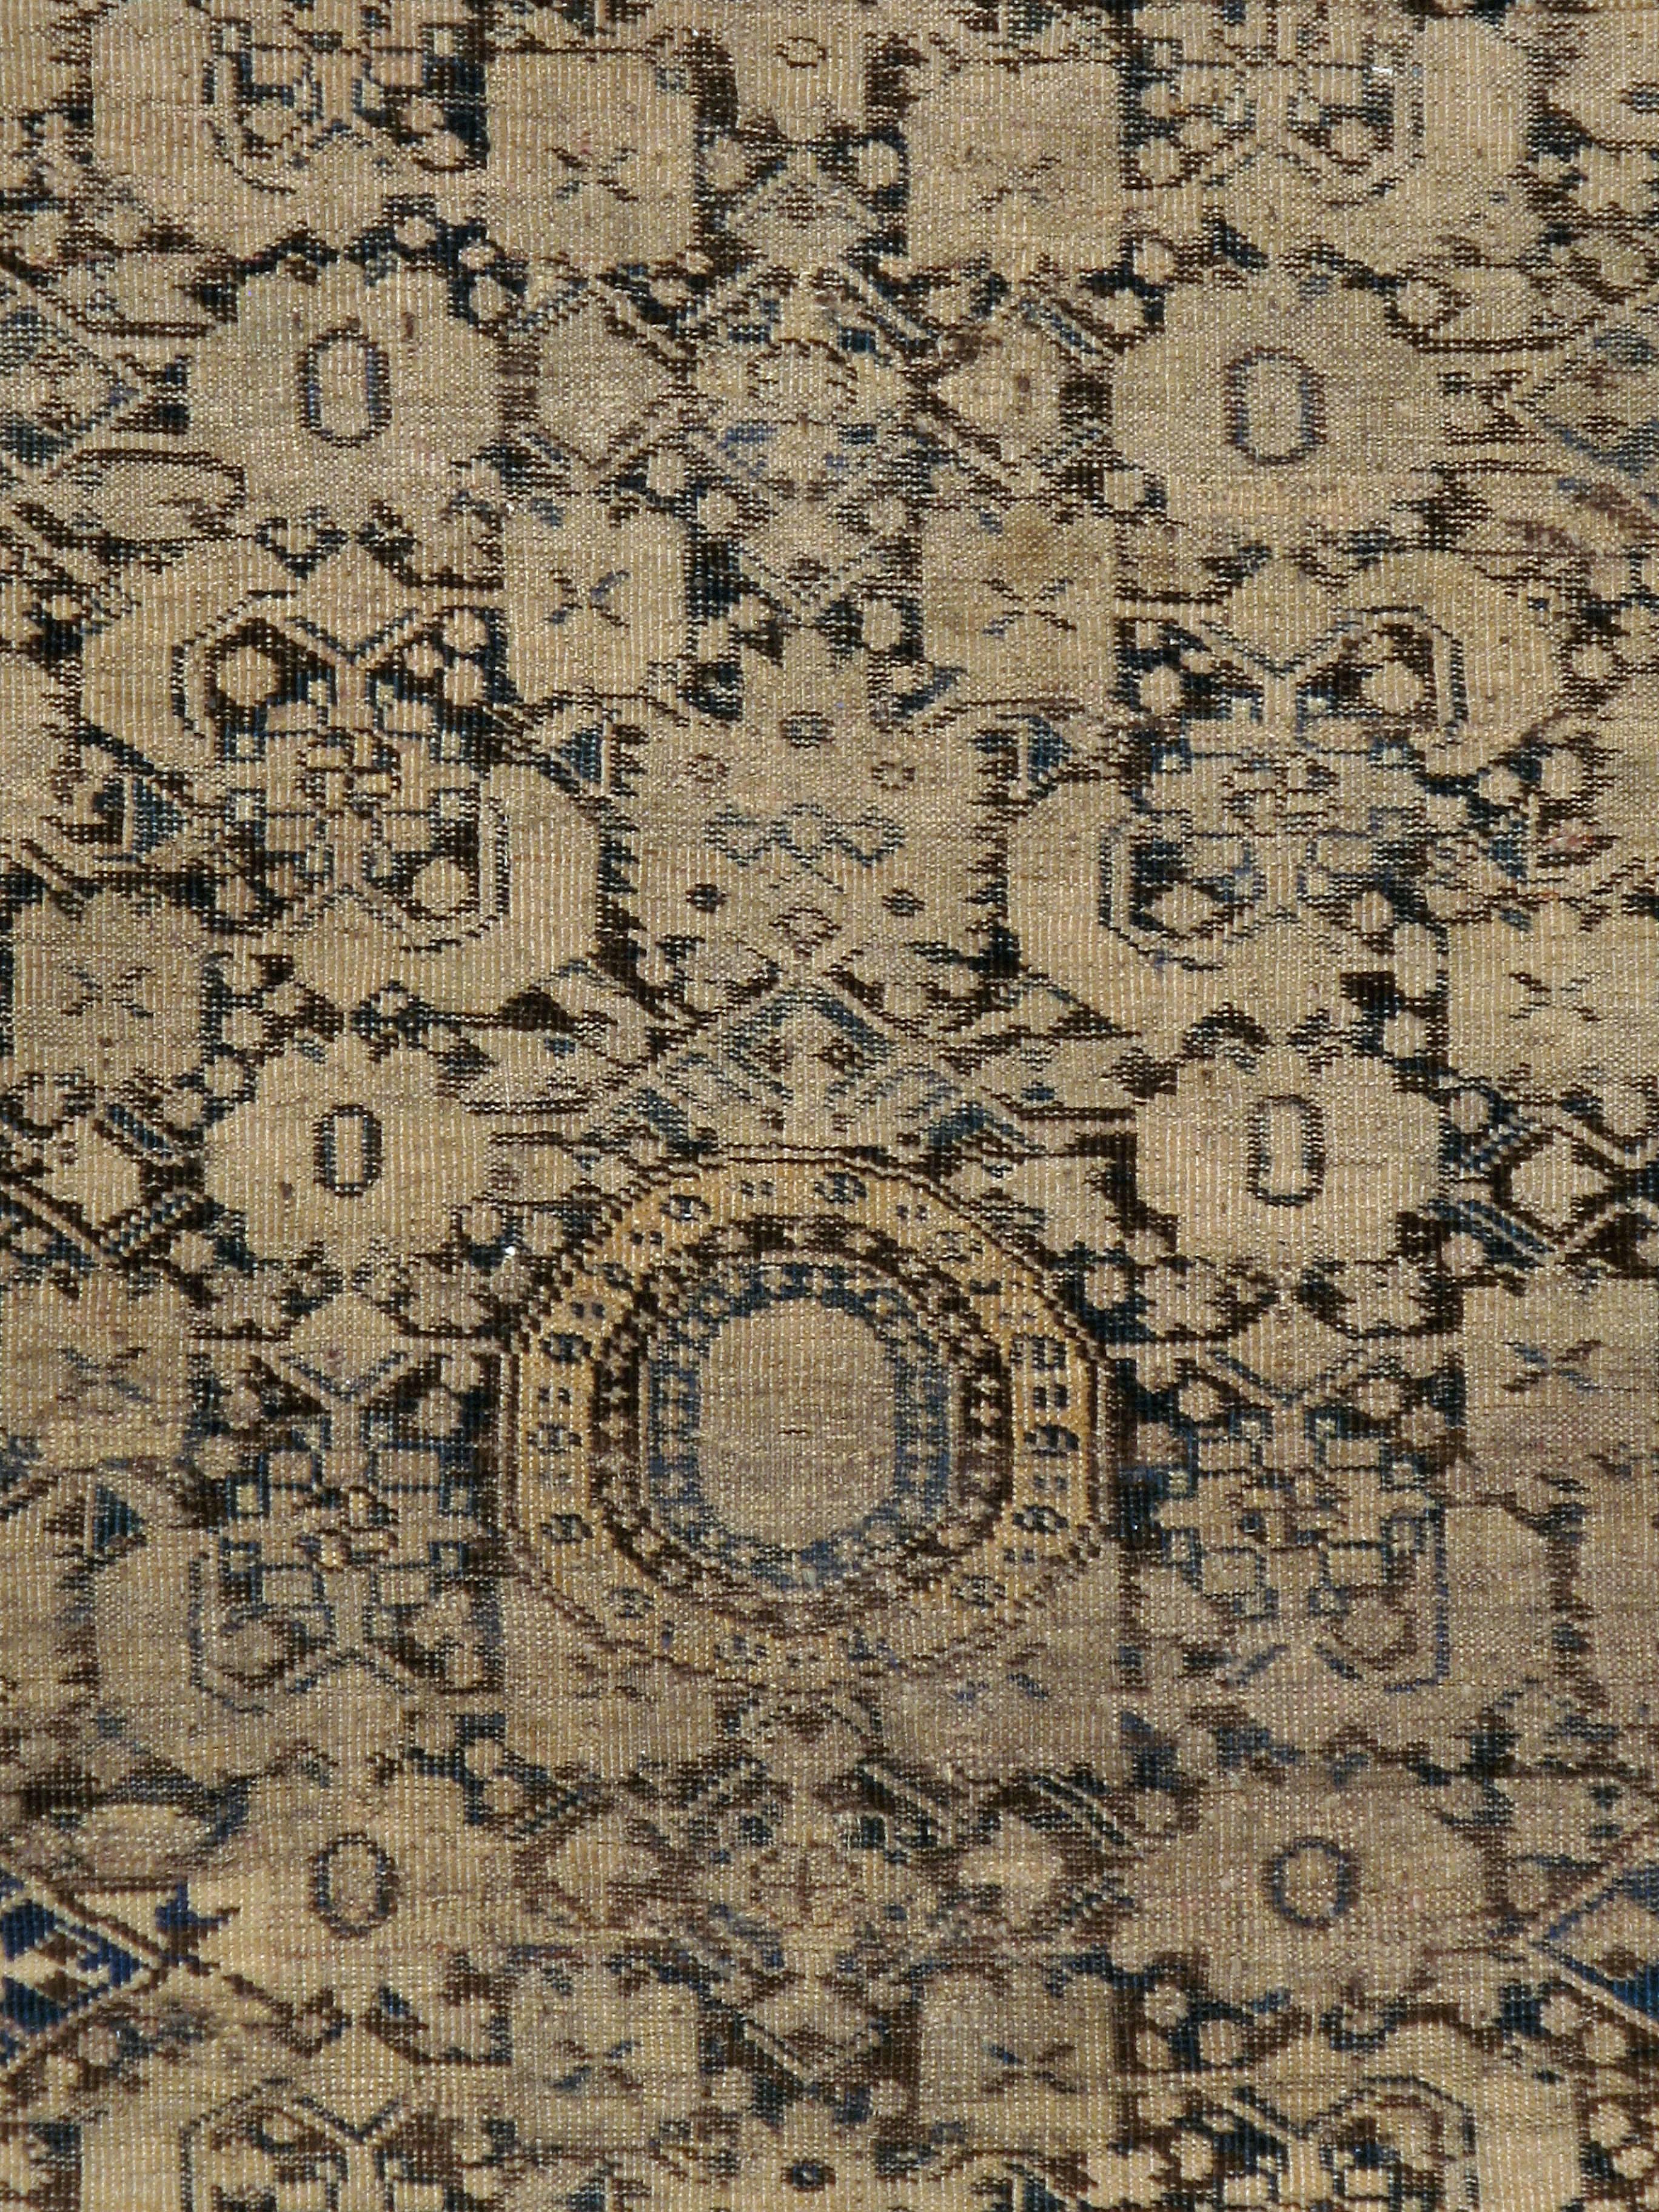 An antique Central Asian Turkoman gallery rug from the early 20th century.

Measures: 4' 9